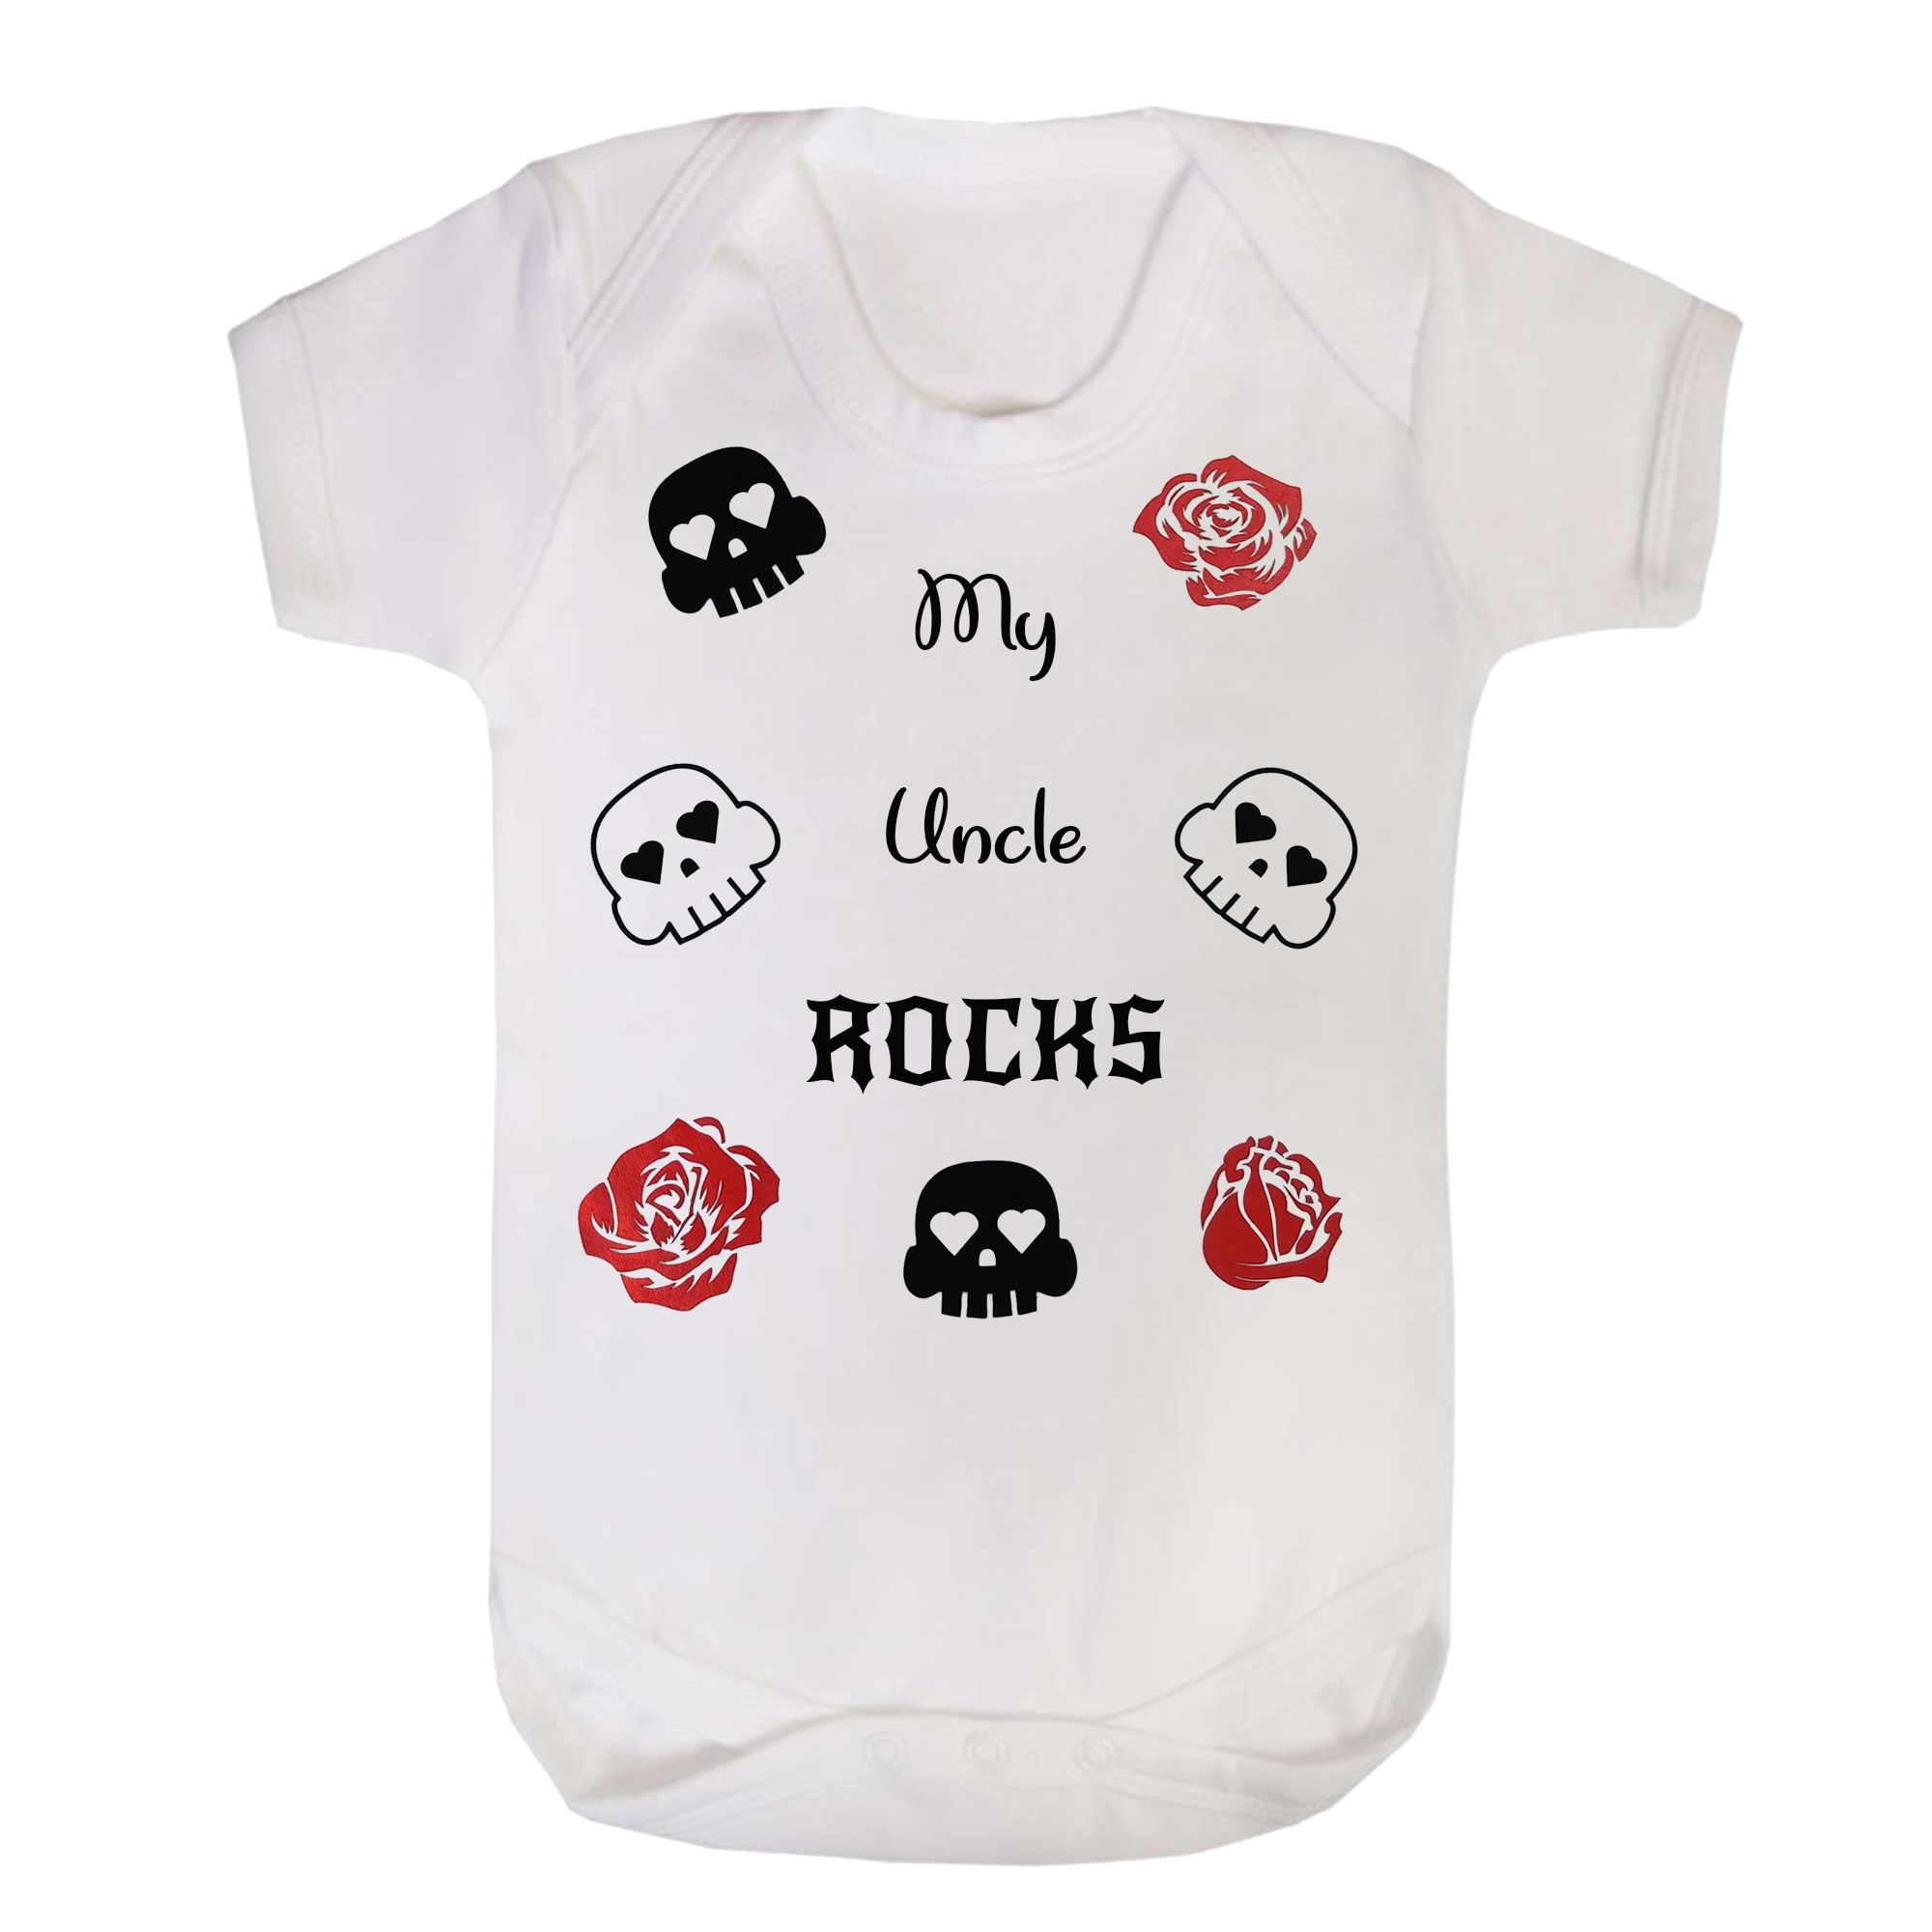 Little rockstars my uncle rocks t-shirt with sparkly red glitter roses perfect for mothers day, birthdays or as a gift or present for your little rockstars